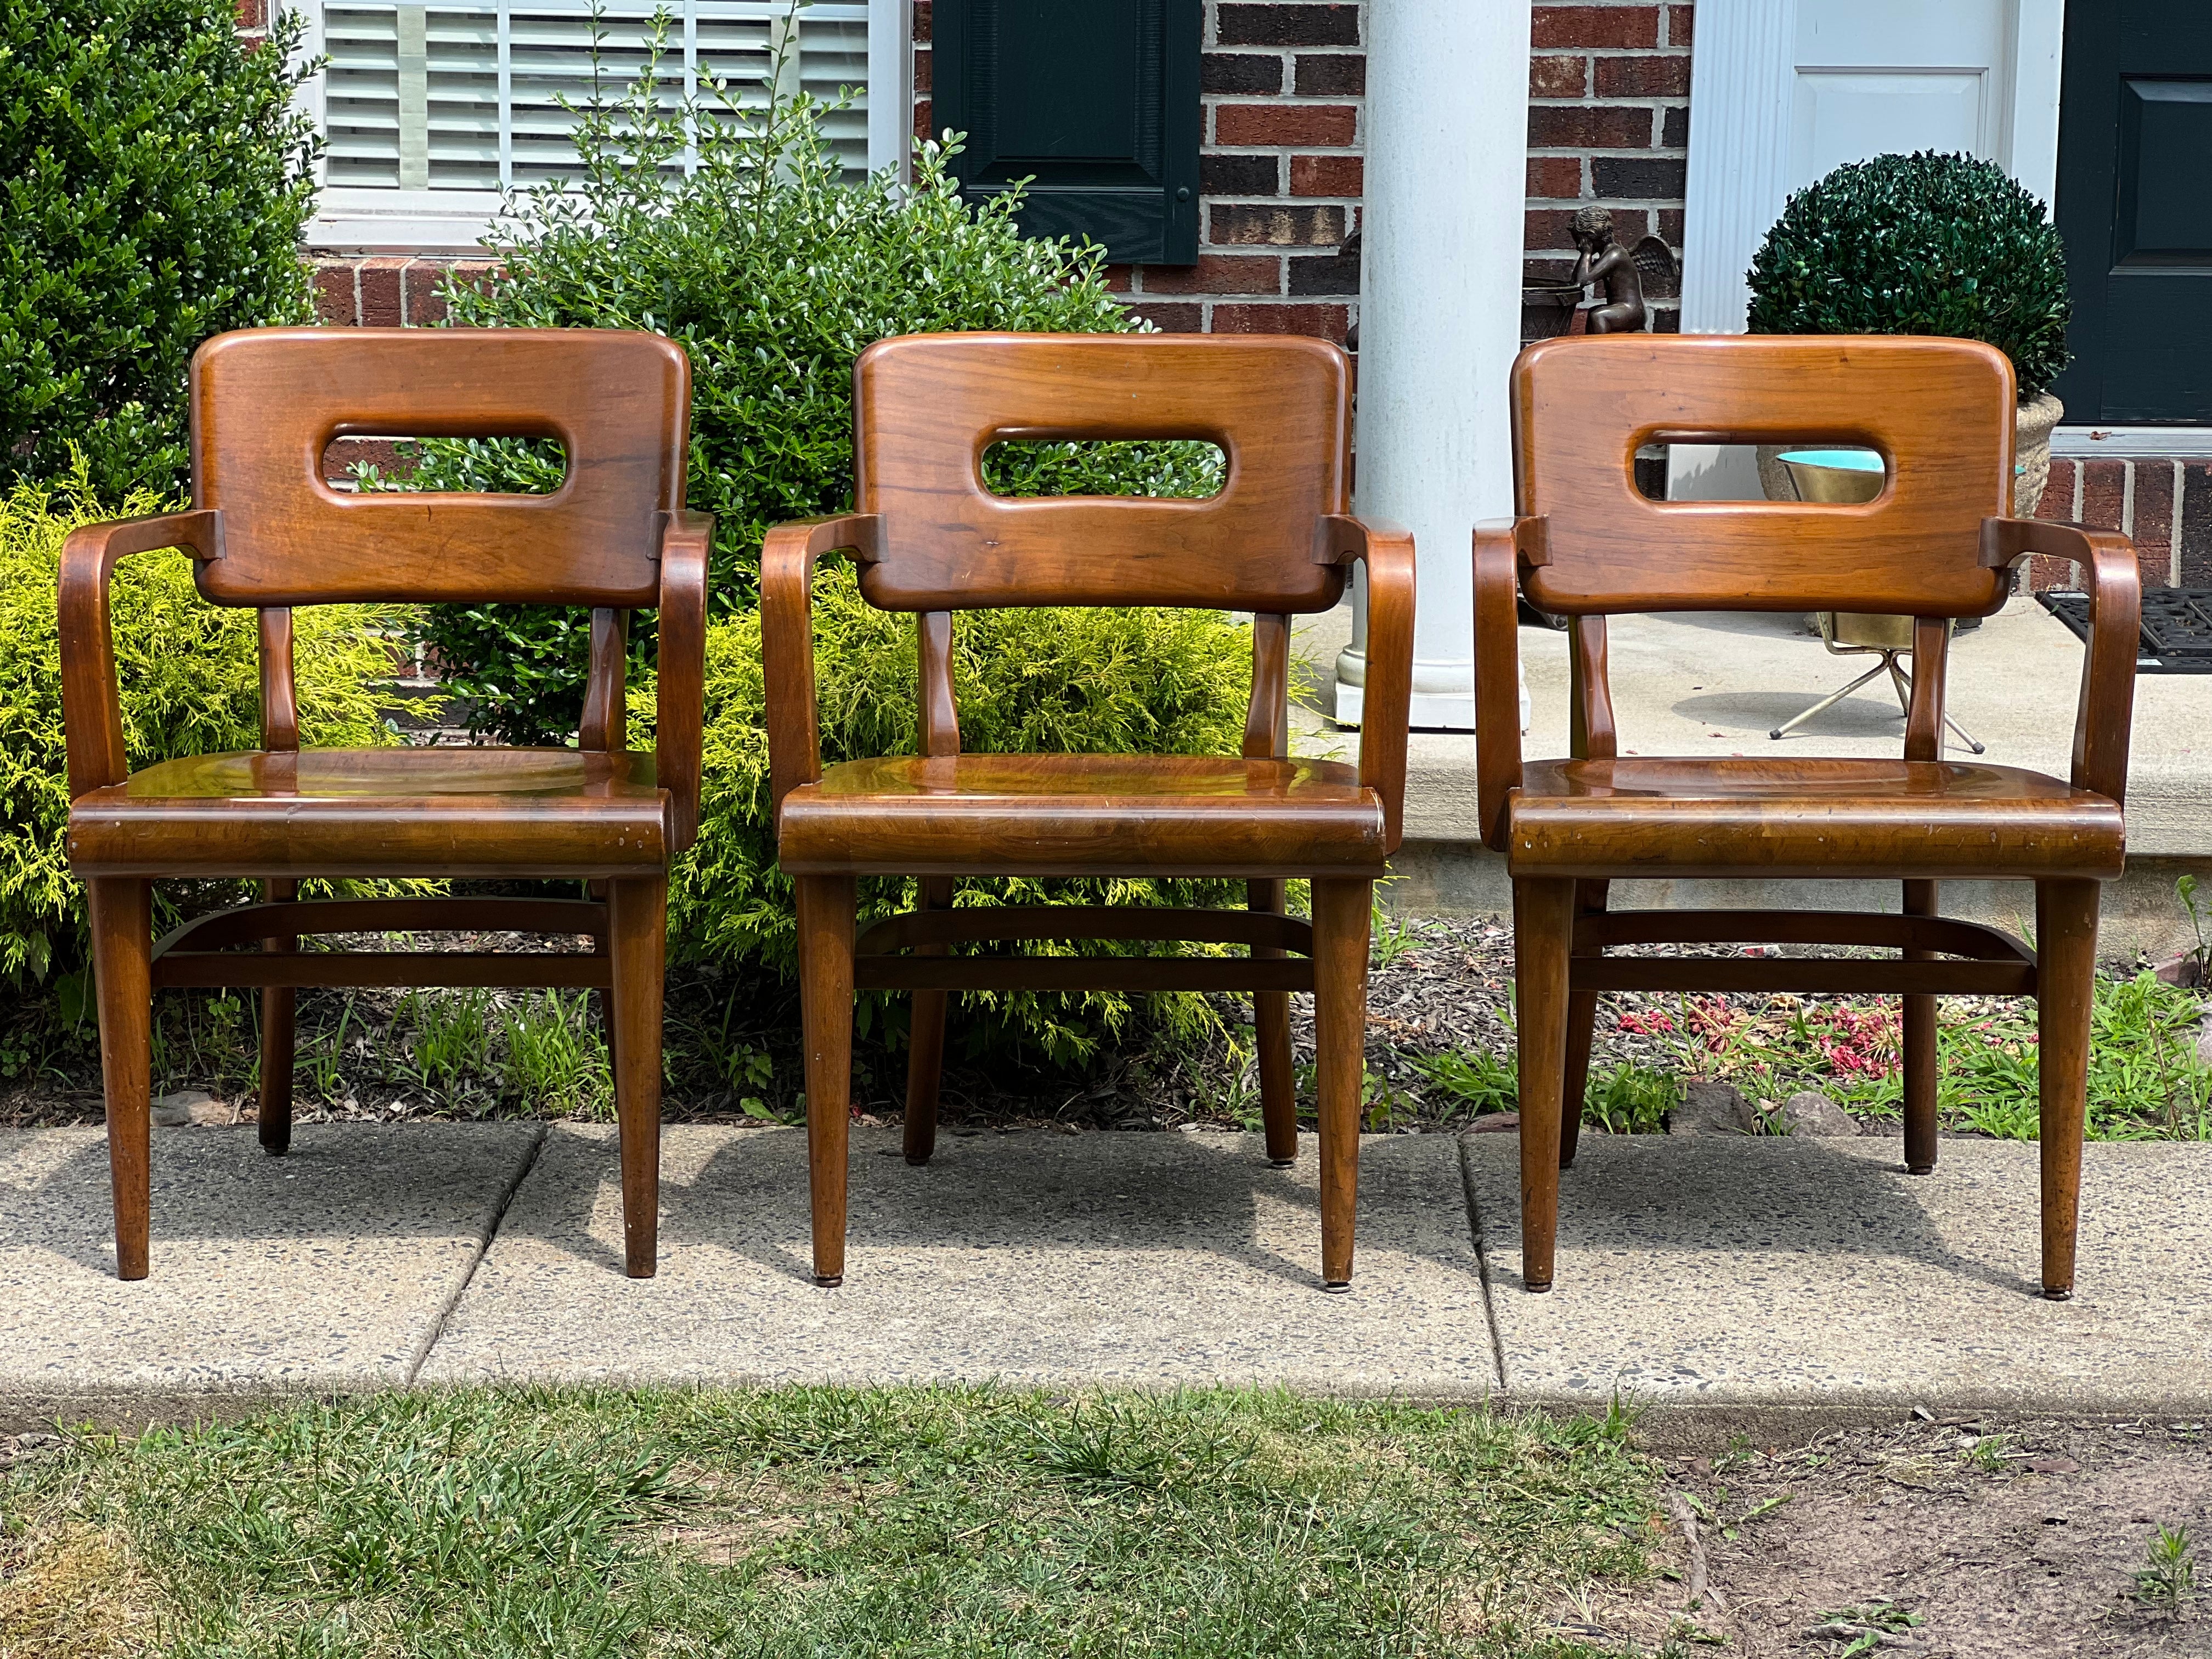 Set of 3 vintage Gunlocke walnut arm/side chairs with original tags. From a rectory in New York City, each chair exhibits exquisite craftsmanship and clean lines. Beautiful set In very good condition.